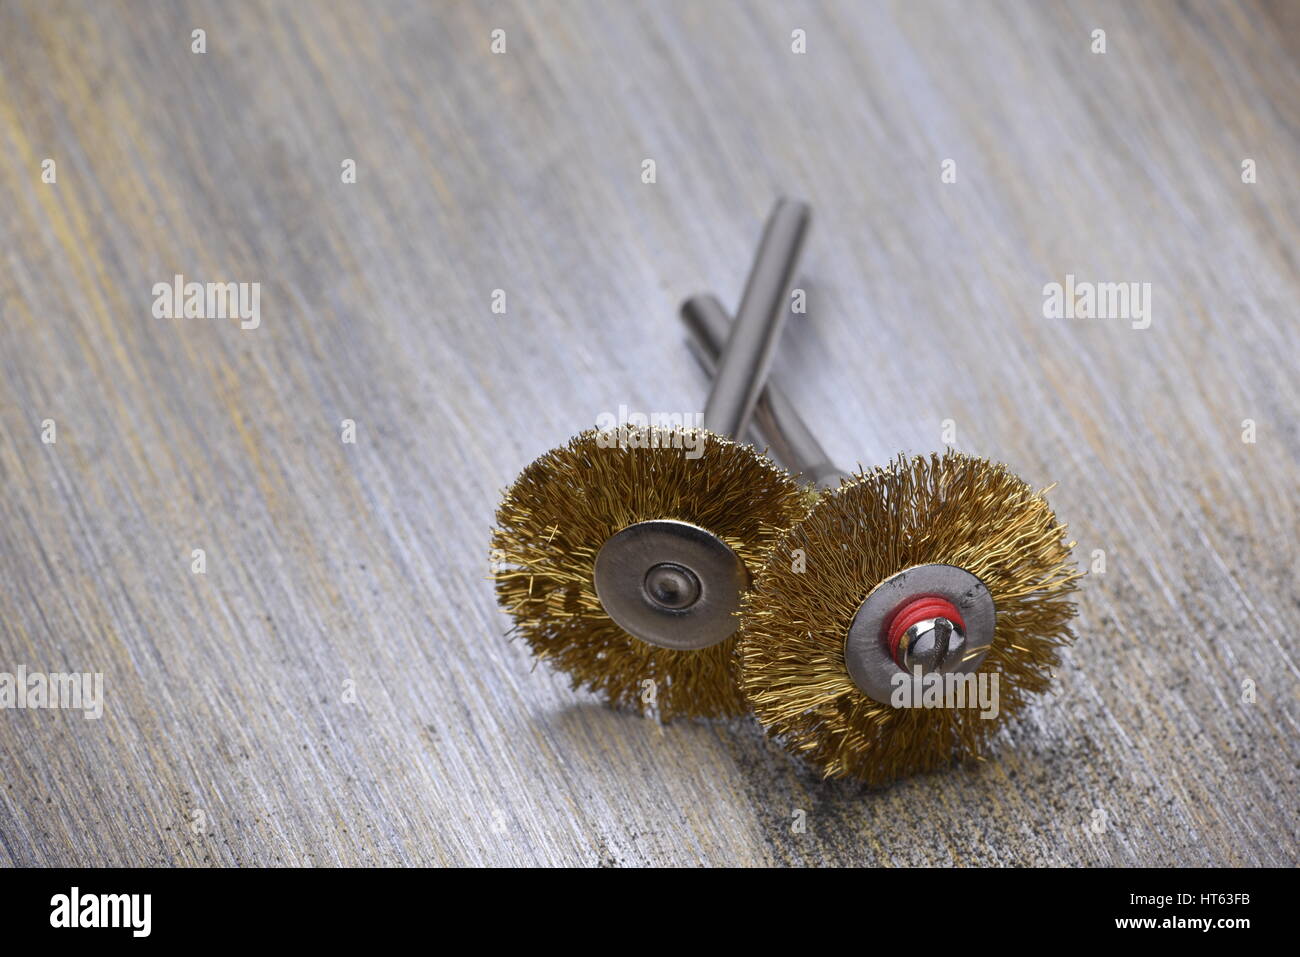 https://c8.alamy.com/comp/HT63FB/steel-wire-wheel-brushes-for-cleaning-on-metal-background-with-selective-HT63FB.jpg